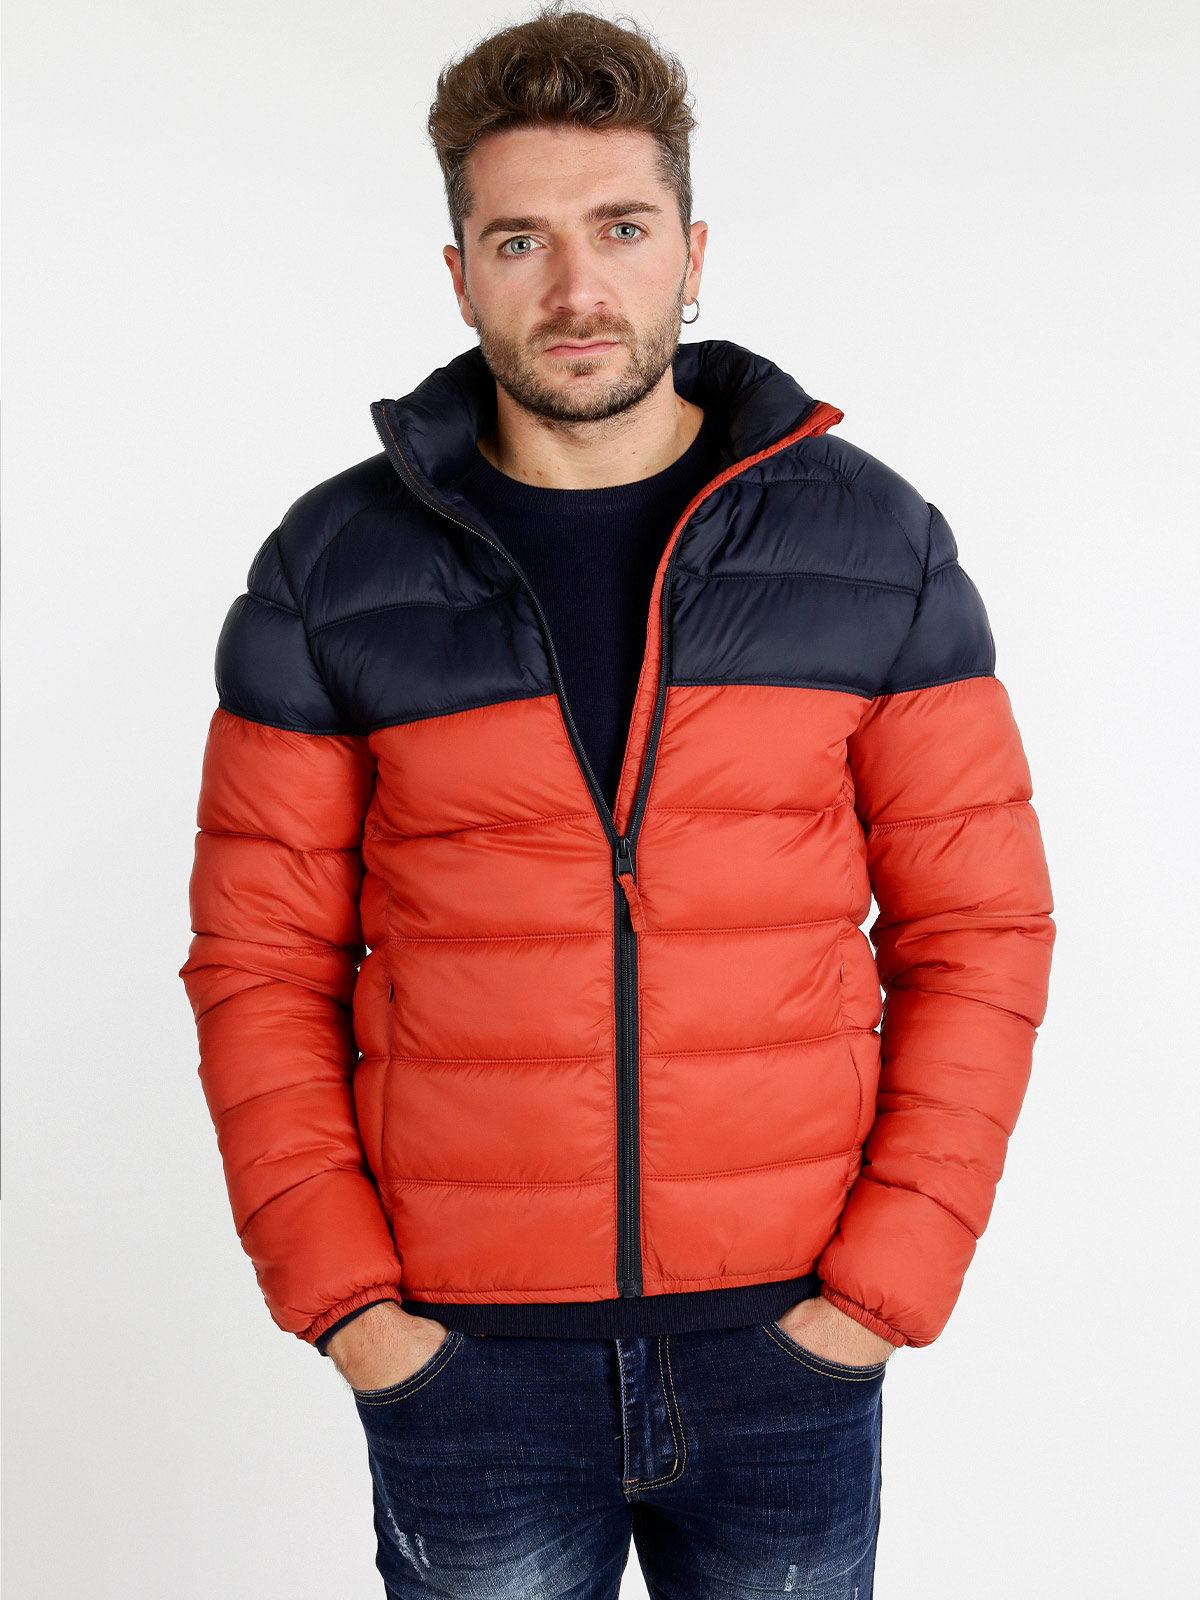 Guy Men's padded jacket without hood: Montgomery and Anorak